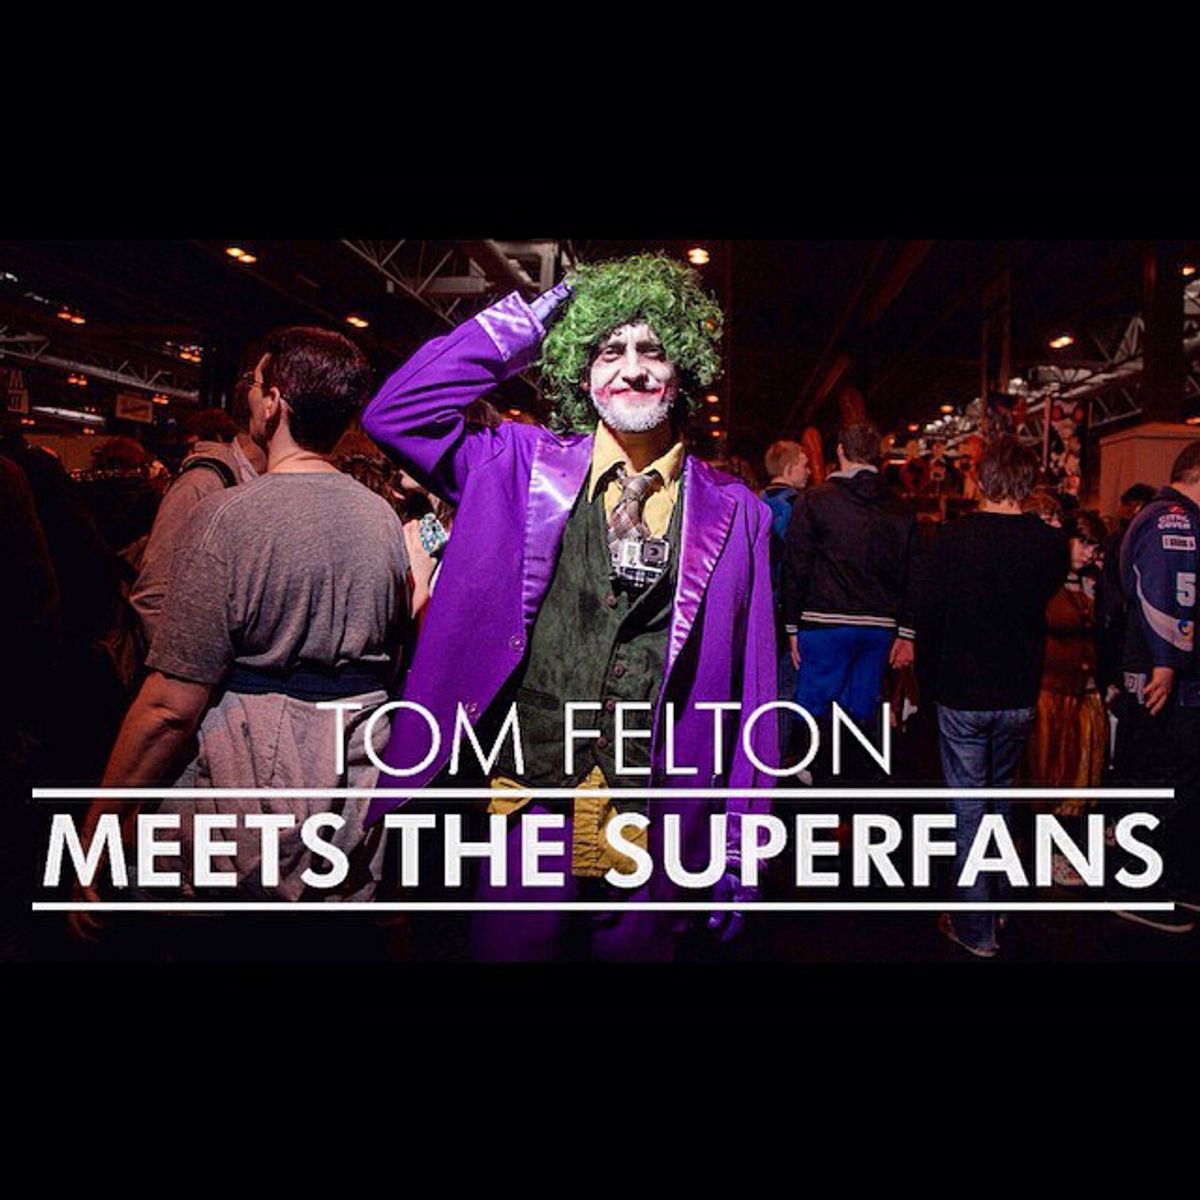 Thoughts on Tom Felton Meets the Superfans